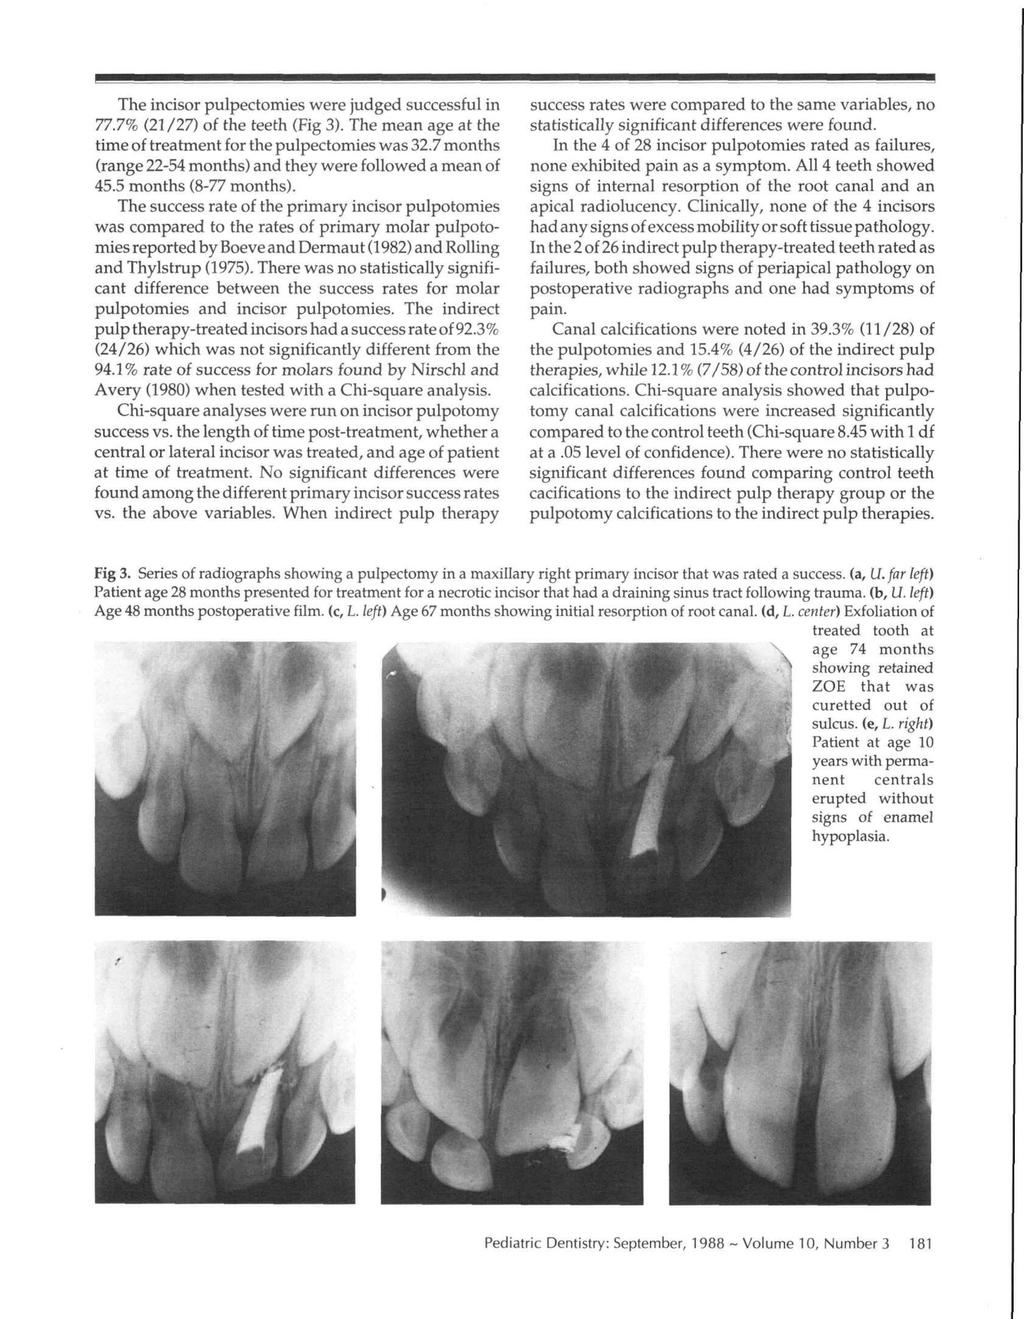 The incisor pulpectomies were judged successful in 77.7% (21/27) of the teeth (Fig 3). The mean age at the time of treatment for the pulpectomies was 32.